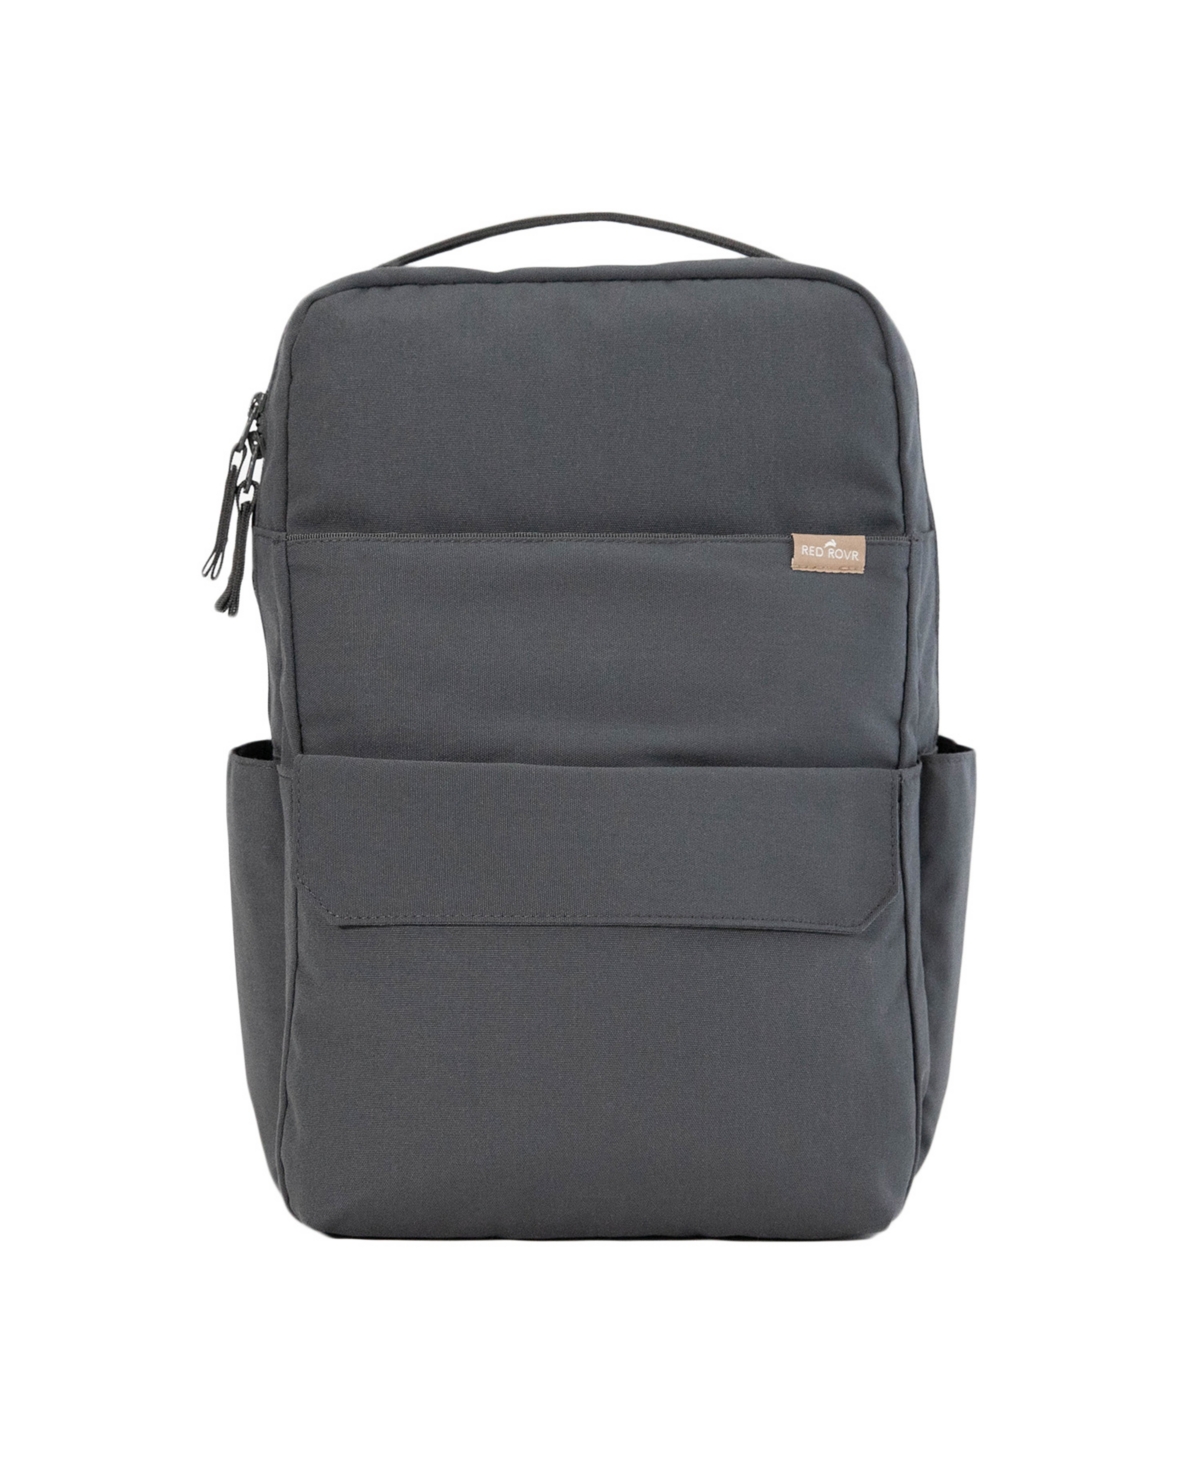 Red Rovr Roo Diaper Backpack In Charcoal